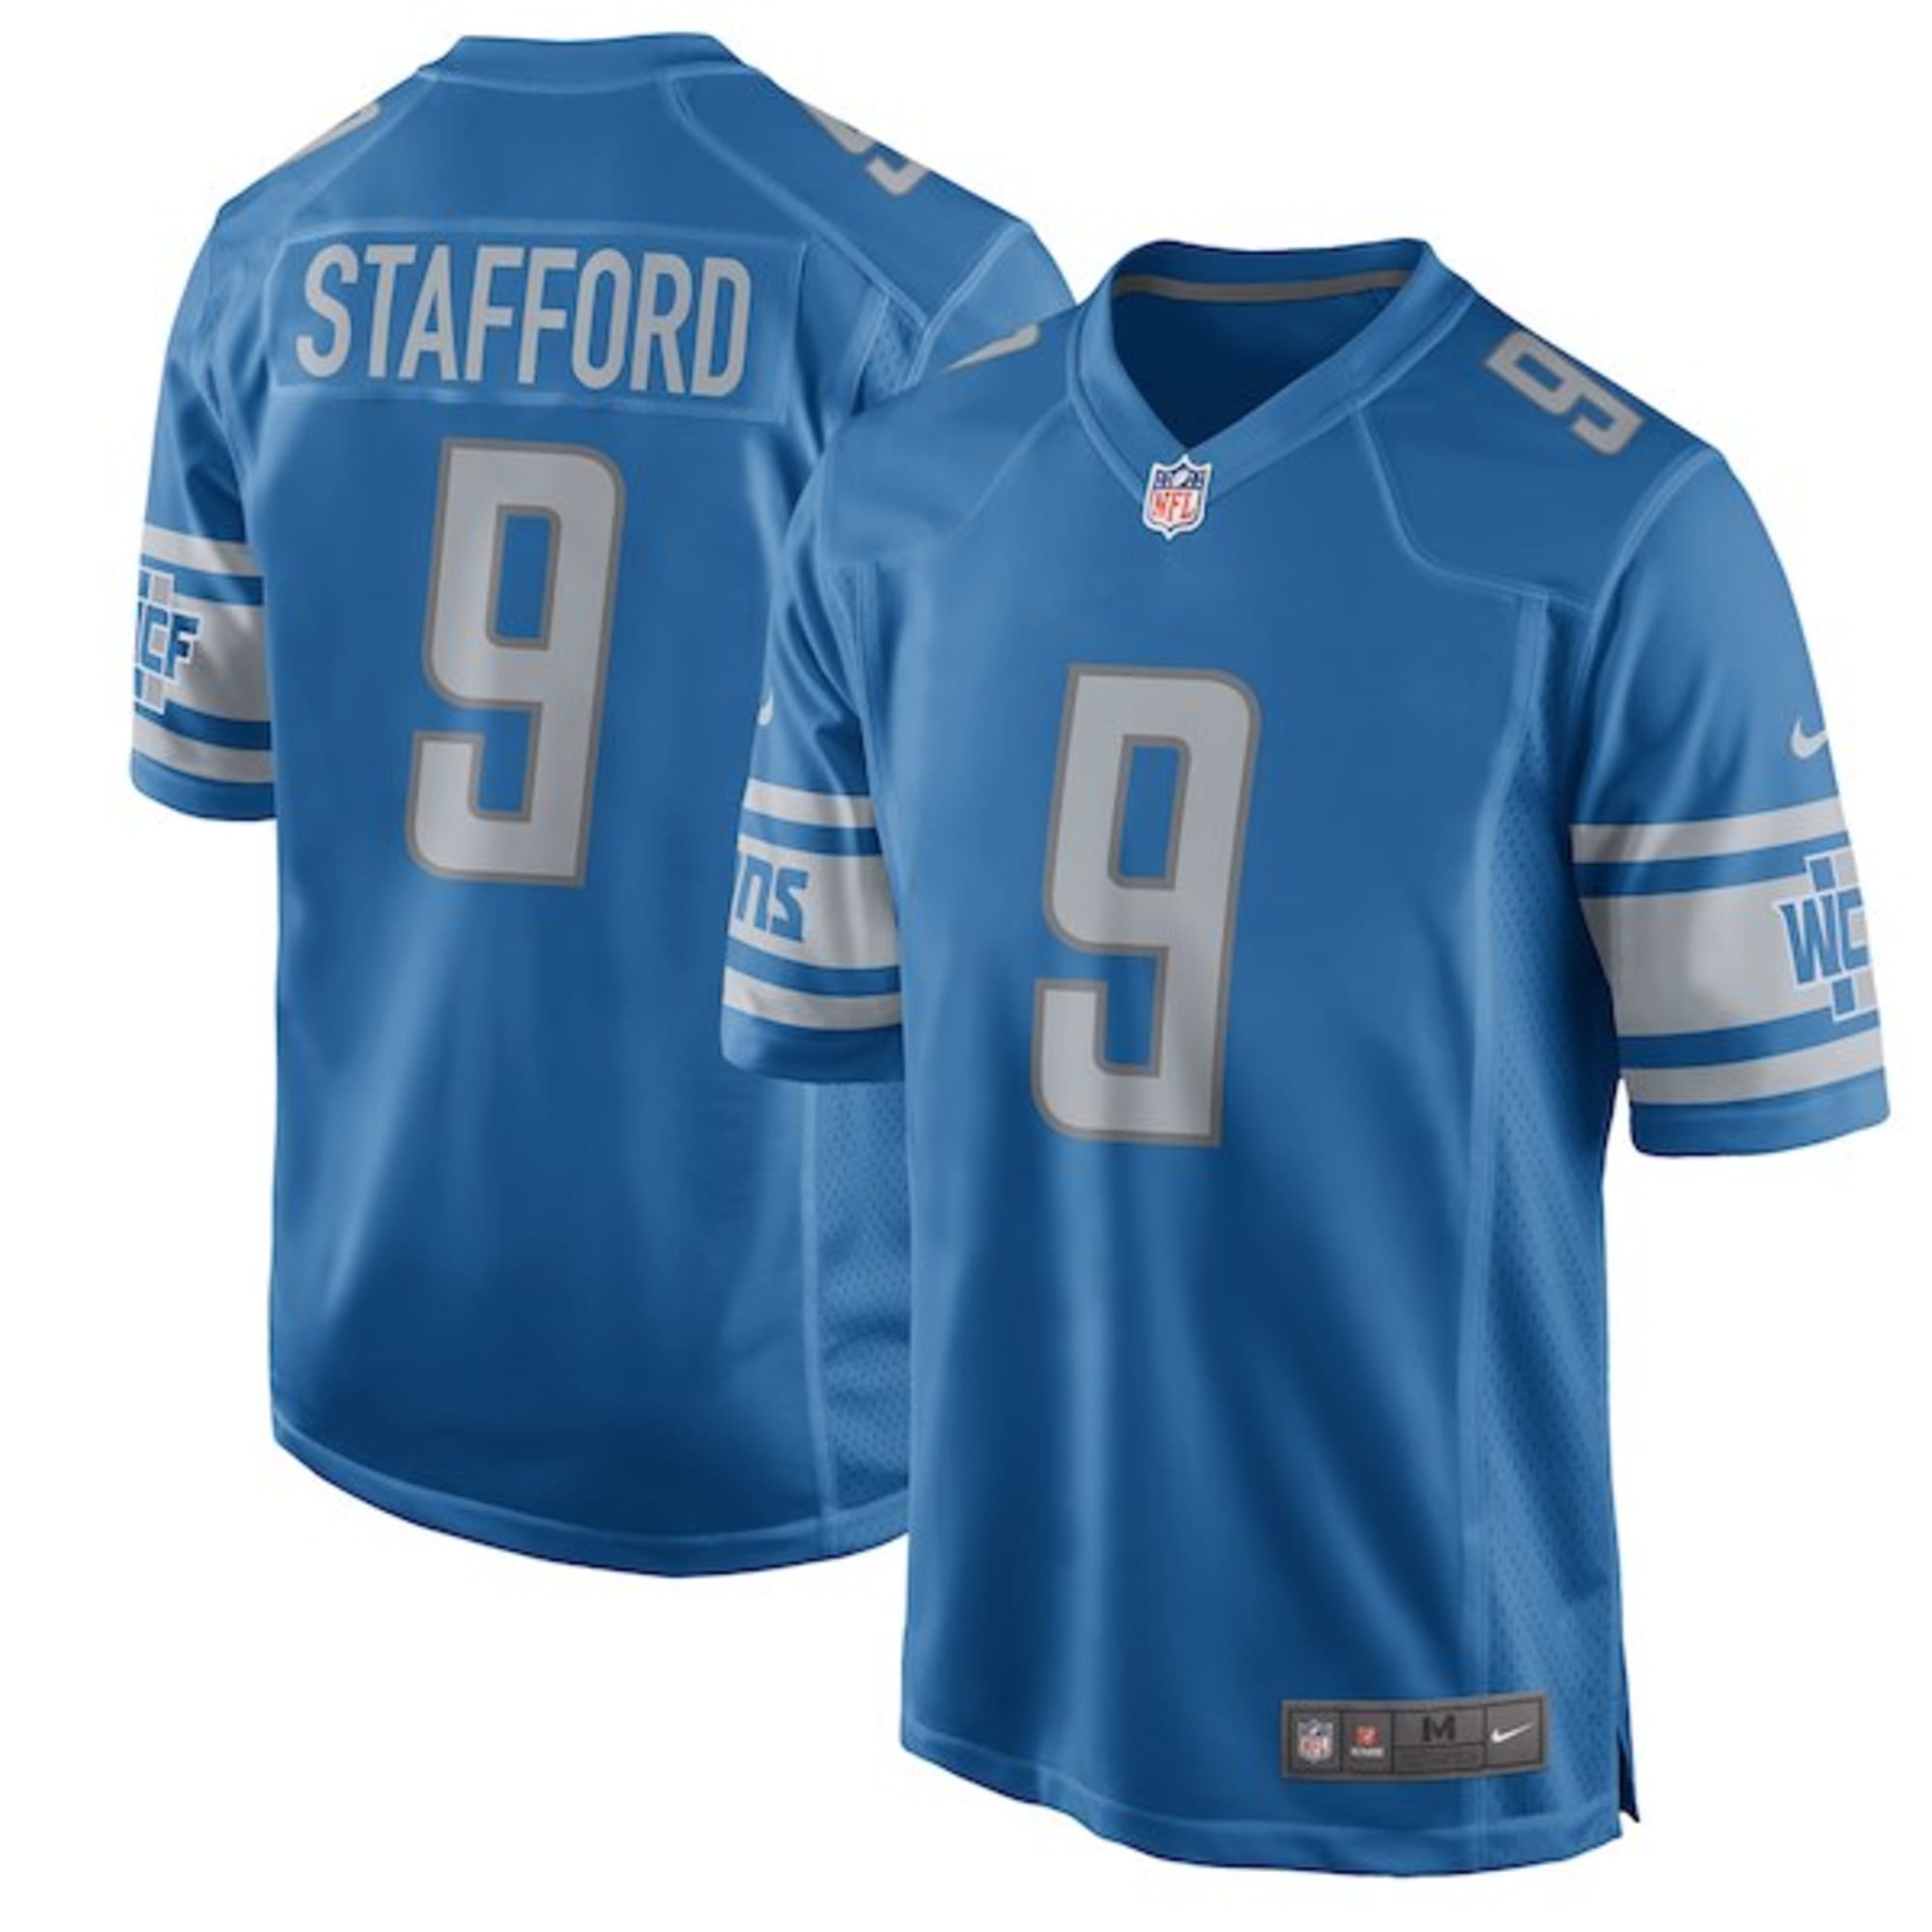 where to buy detroit lions apparel